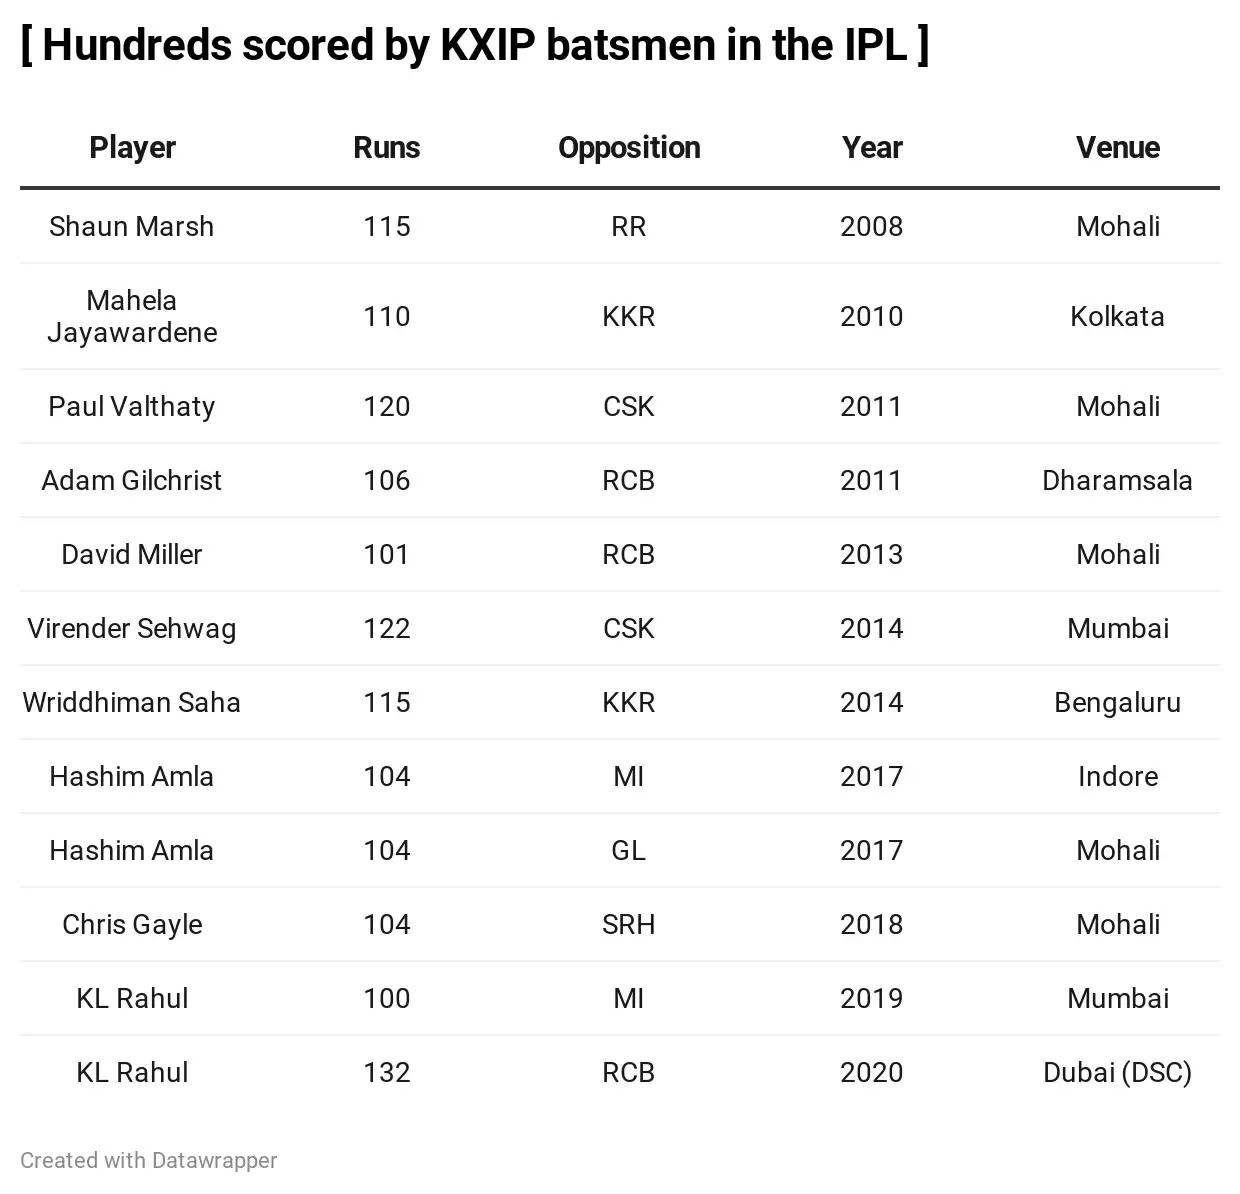 IPL 2020: Records that KL Rahul broke with his 132* vs RCB